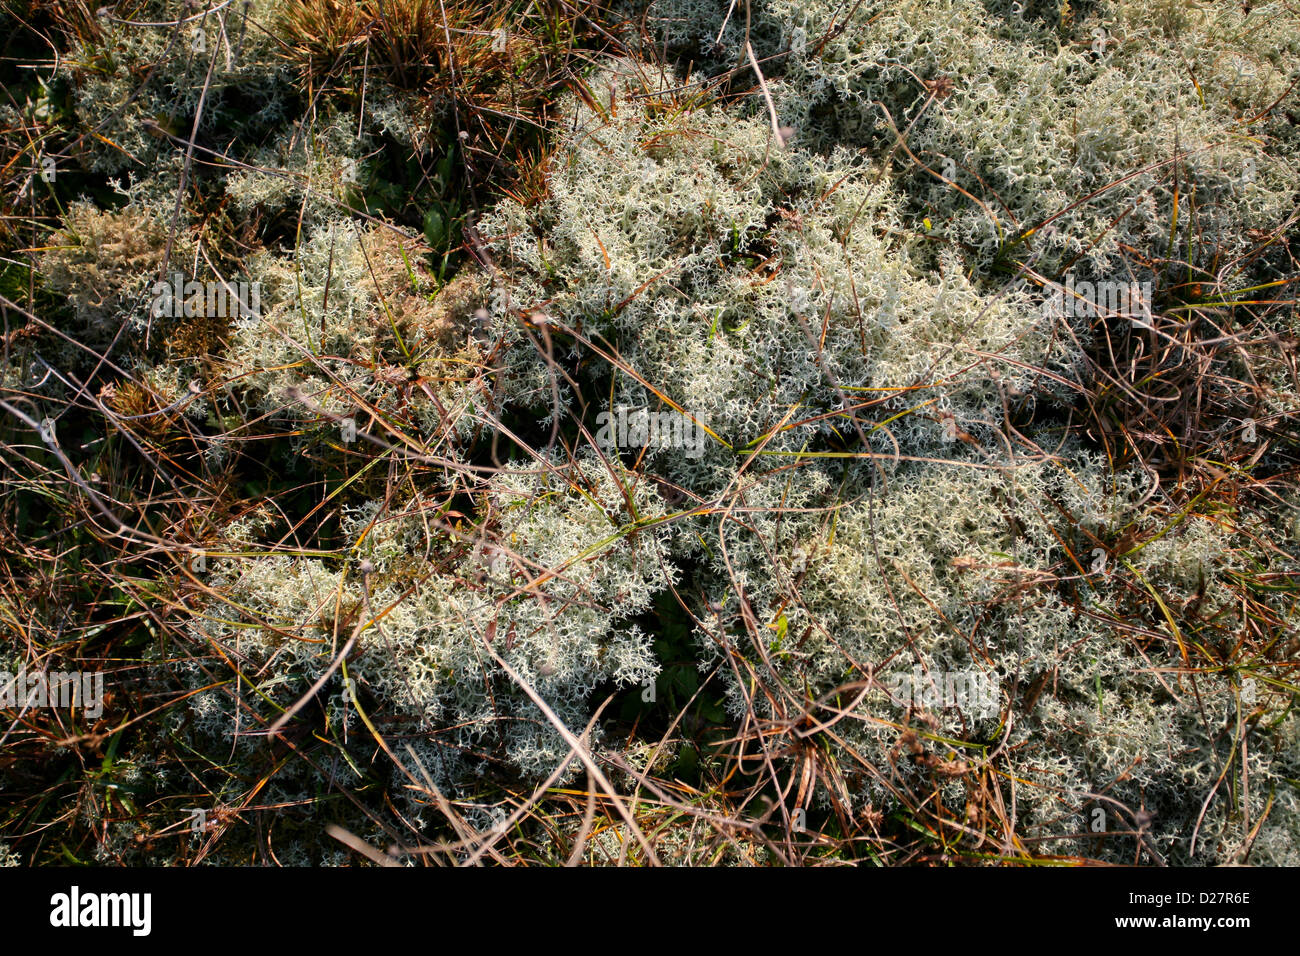 Reindeer lichen (Cladonia portentosa) with sedges, grasses and moss Stock Photo